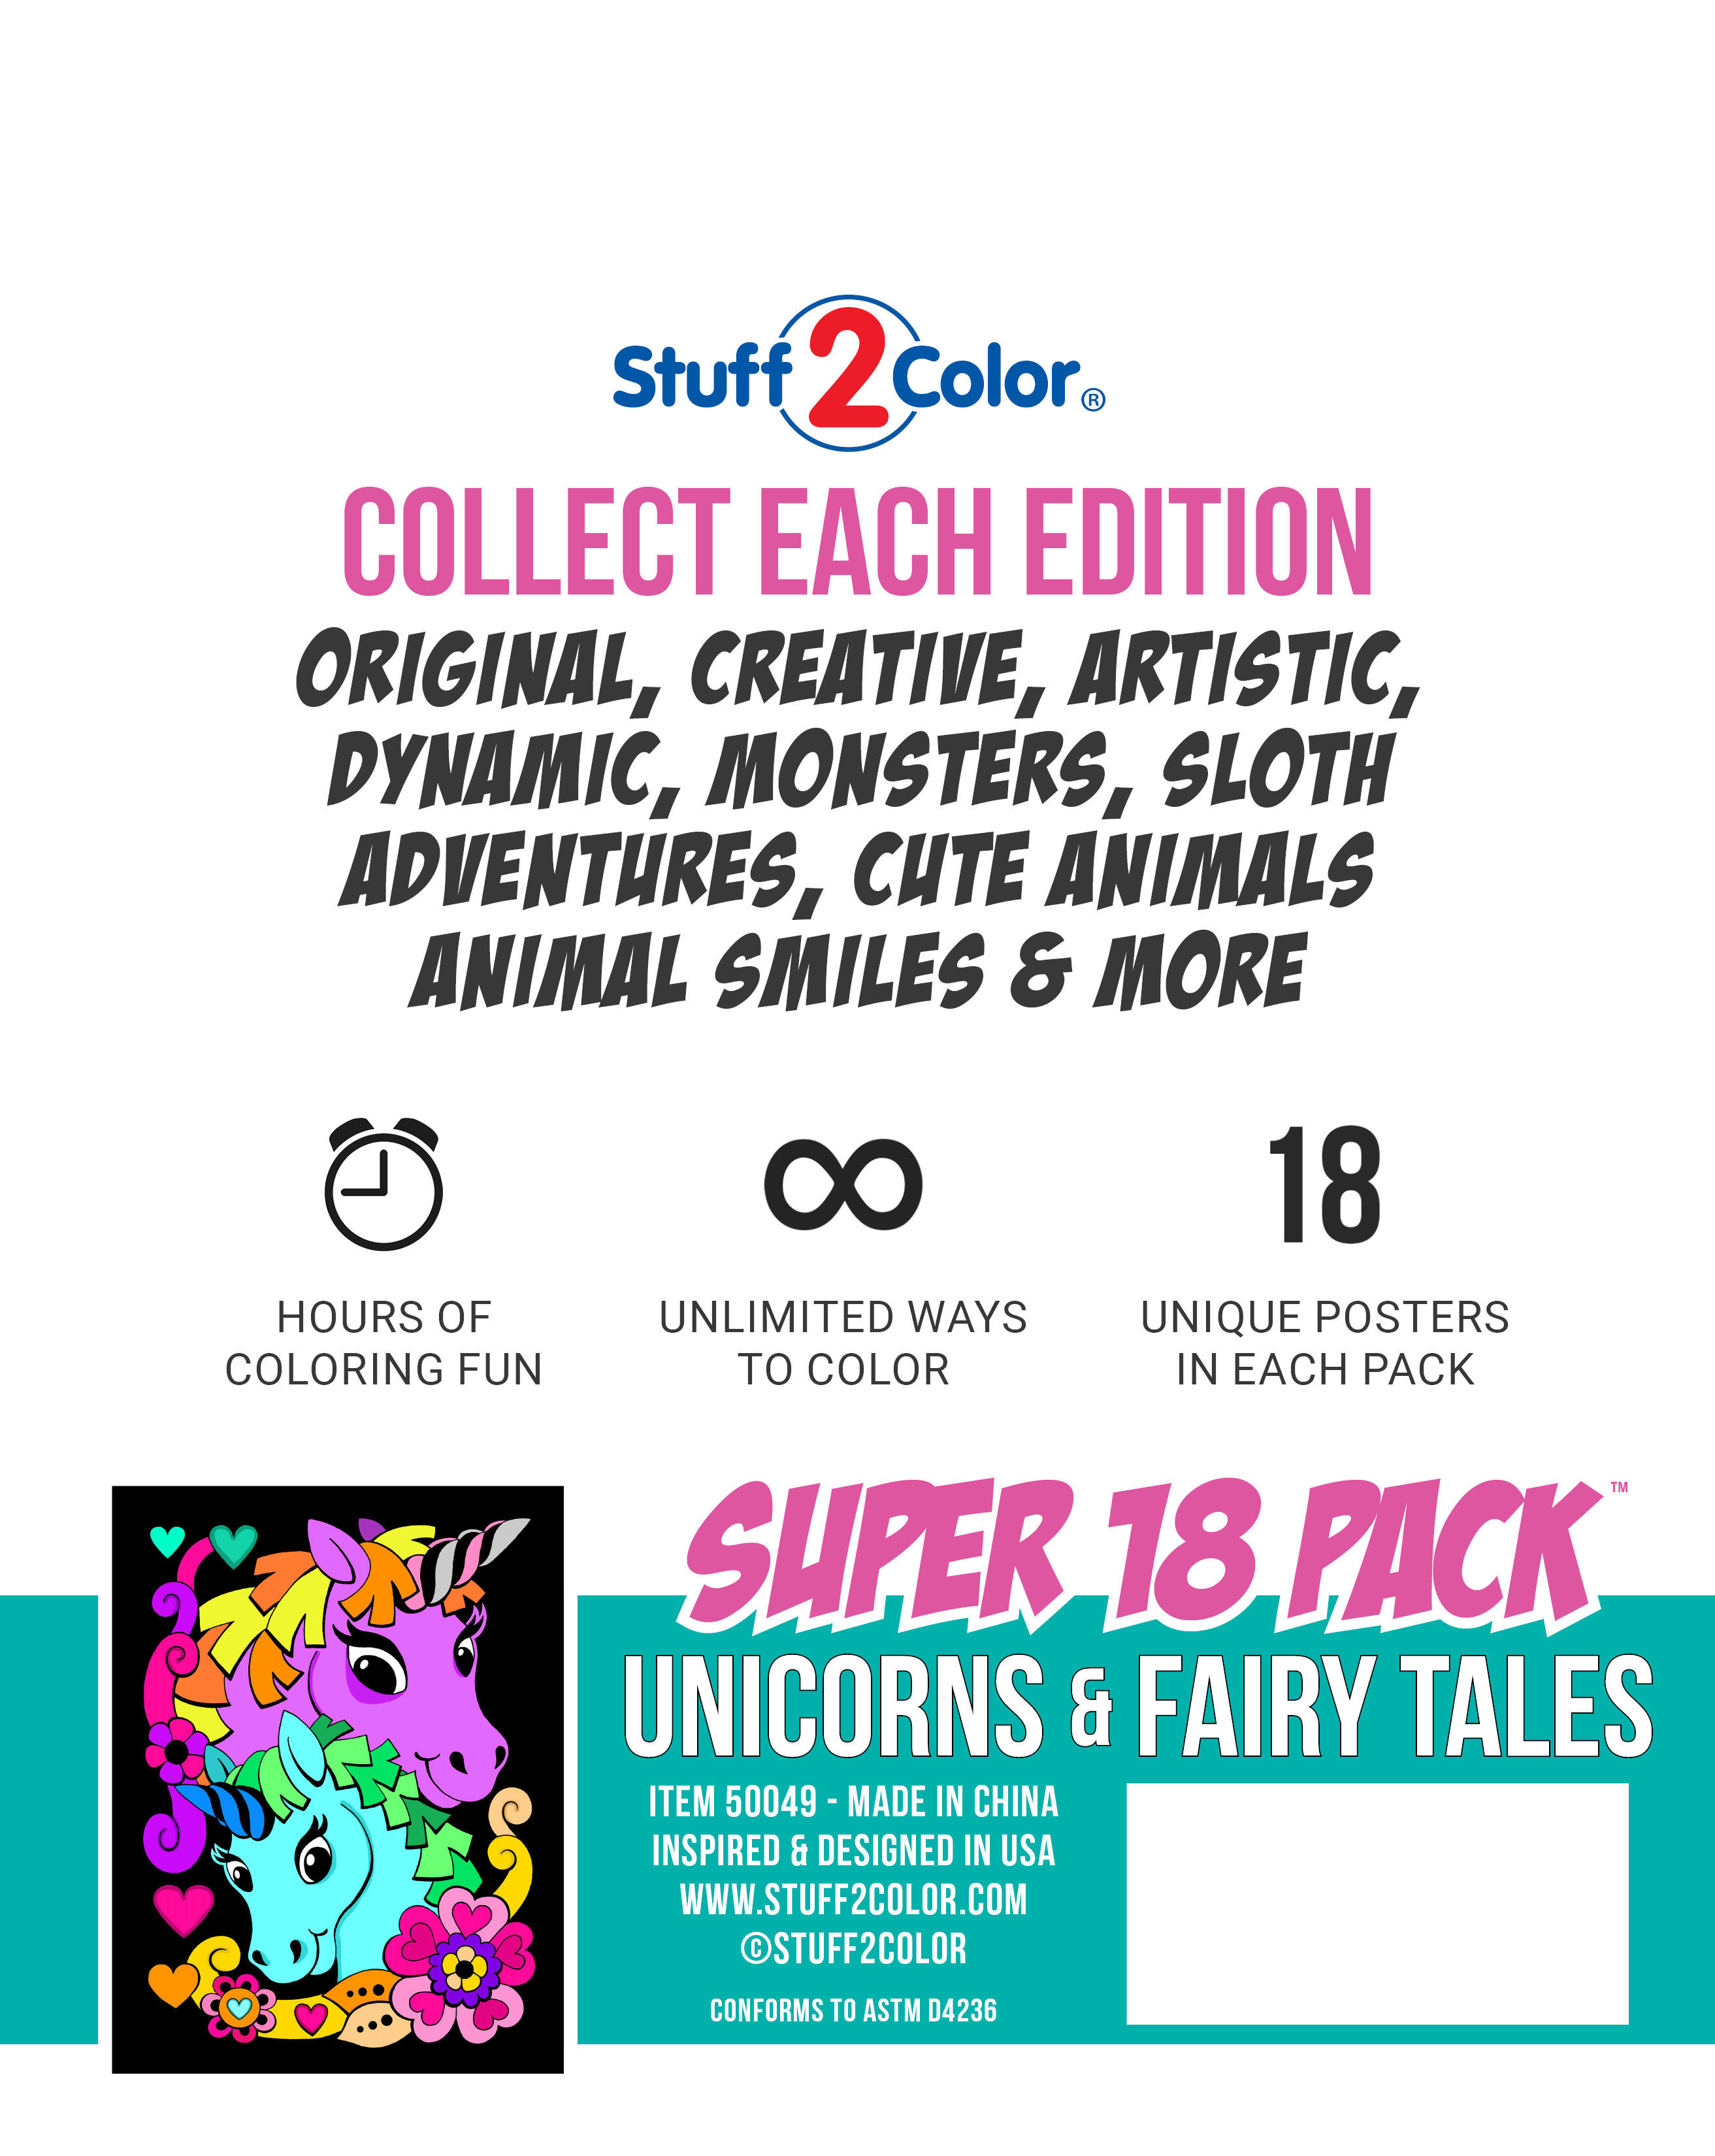 Stuff2Color Super Pack of 18 Fuzzy Coloring Posters (Unicorns & Fairy Tales Edition) - Arts & Crafts for Girls and Boys - Great for After SC